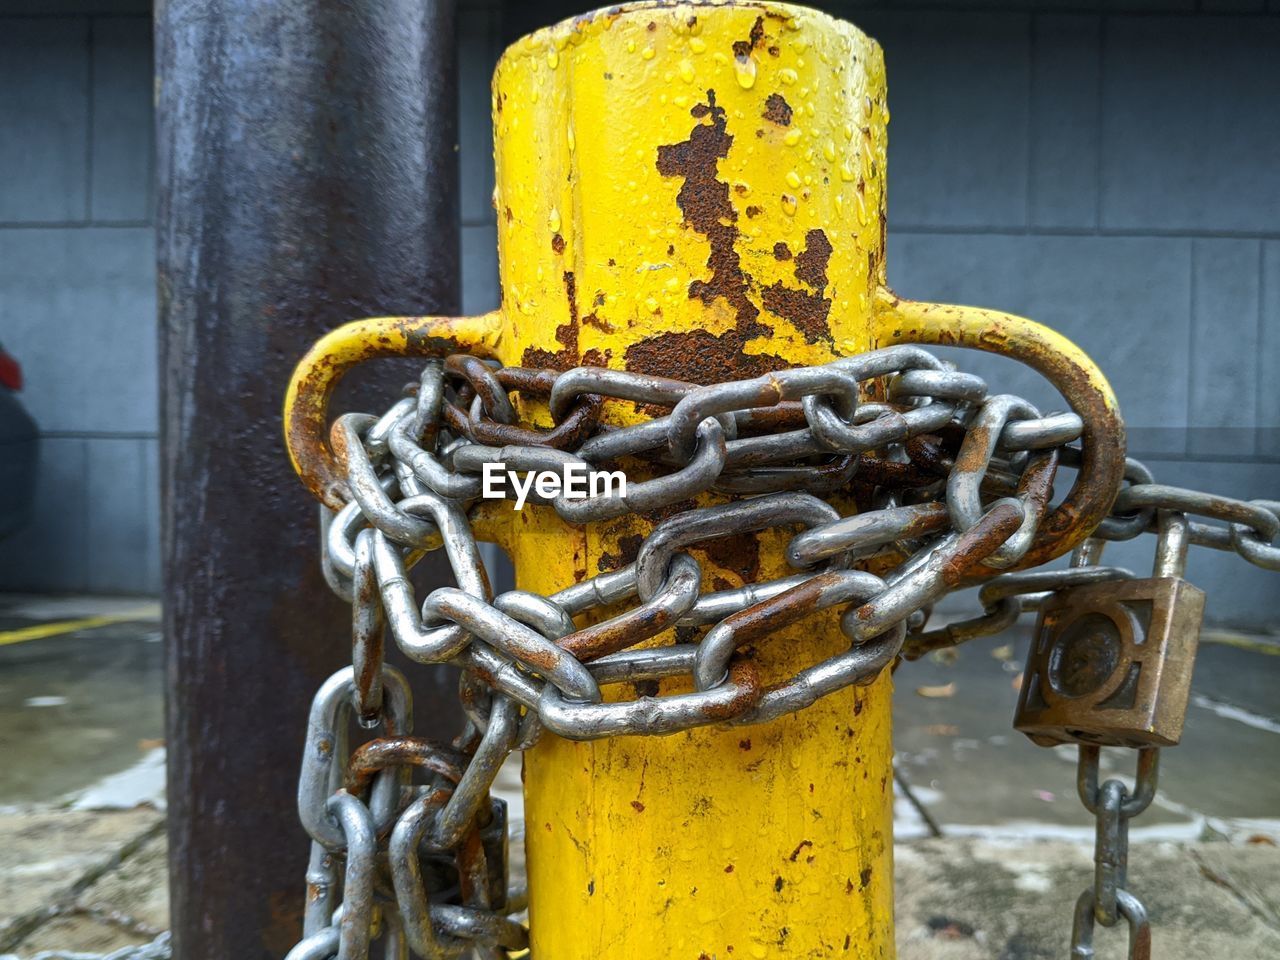 CLOSE-UP OF RUSTY CHAIN TIED UP ON METAL